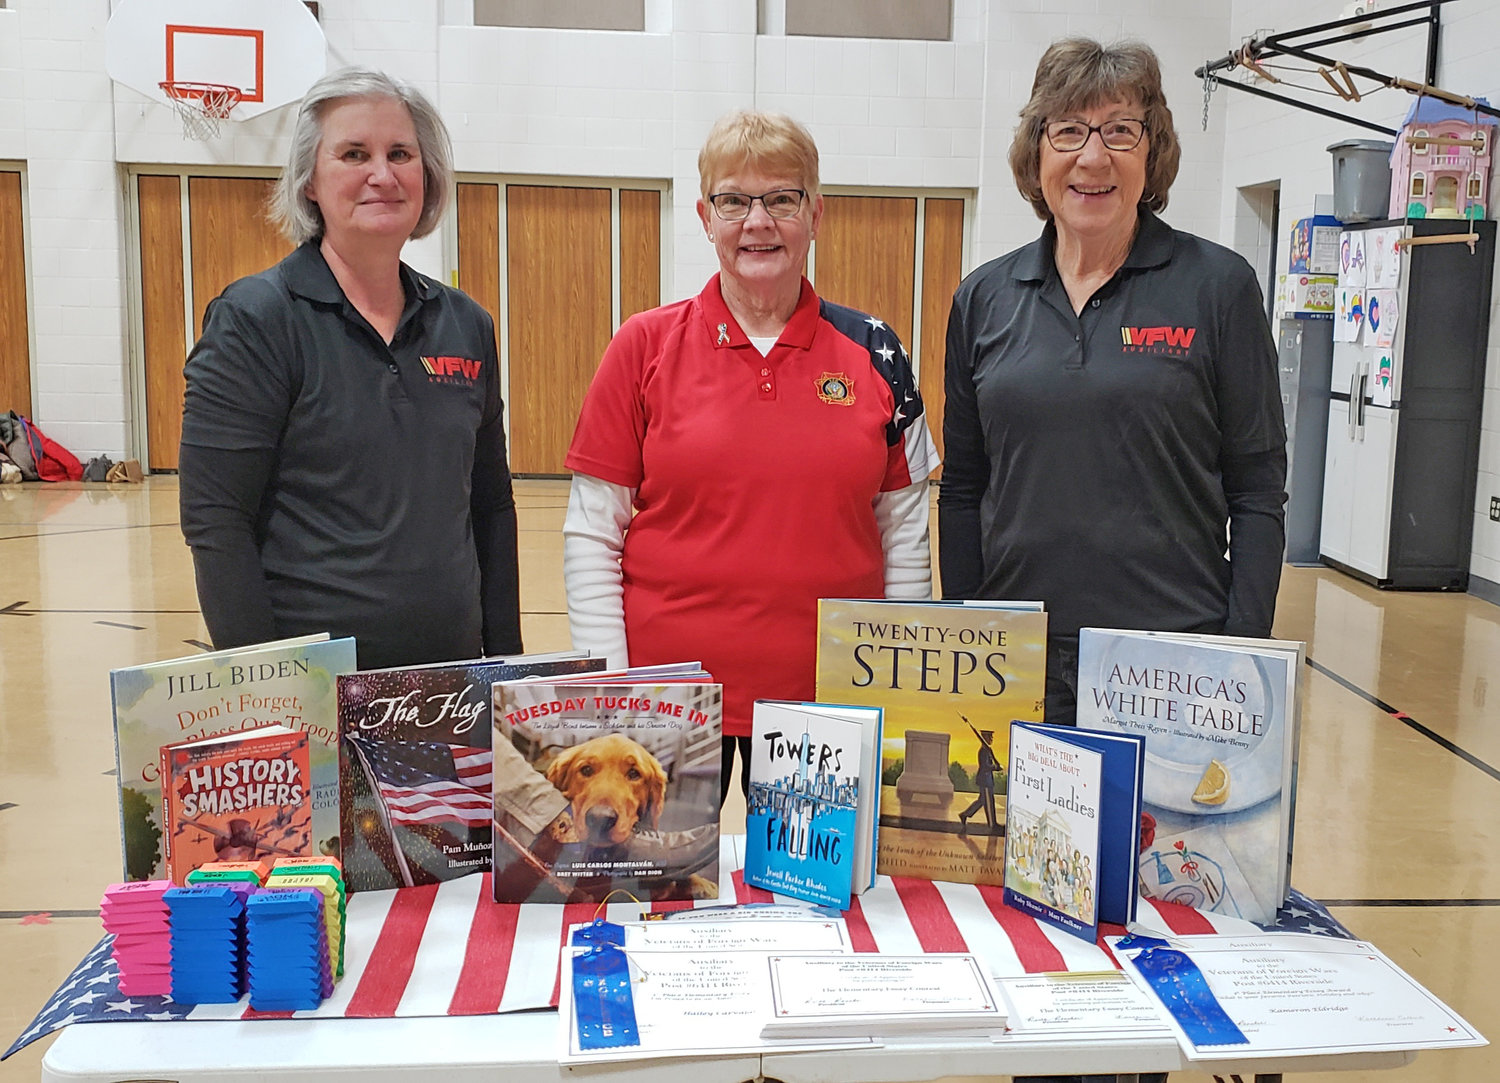 The Auxiliary donated books to the Highland Elementary School library as part of their “Patriotism Through Literacy” project.  L-R:  Auxiliary Treasurer Kathy Colbert, President Ruth Rencher and Secretary Kathy Schreiber.